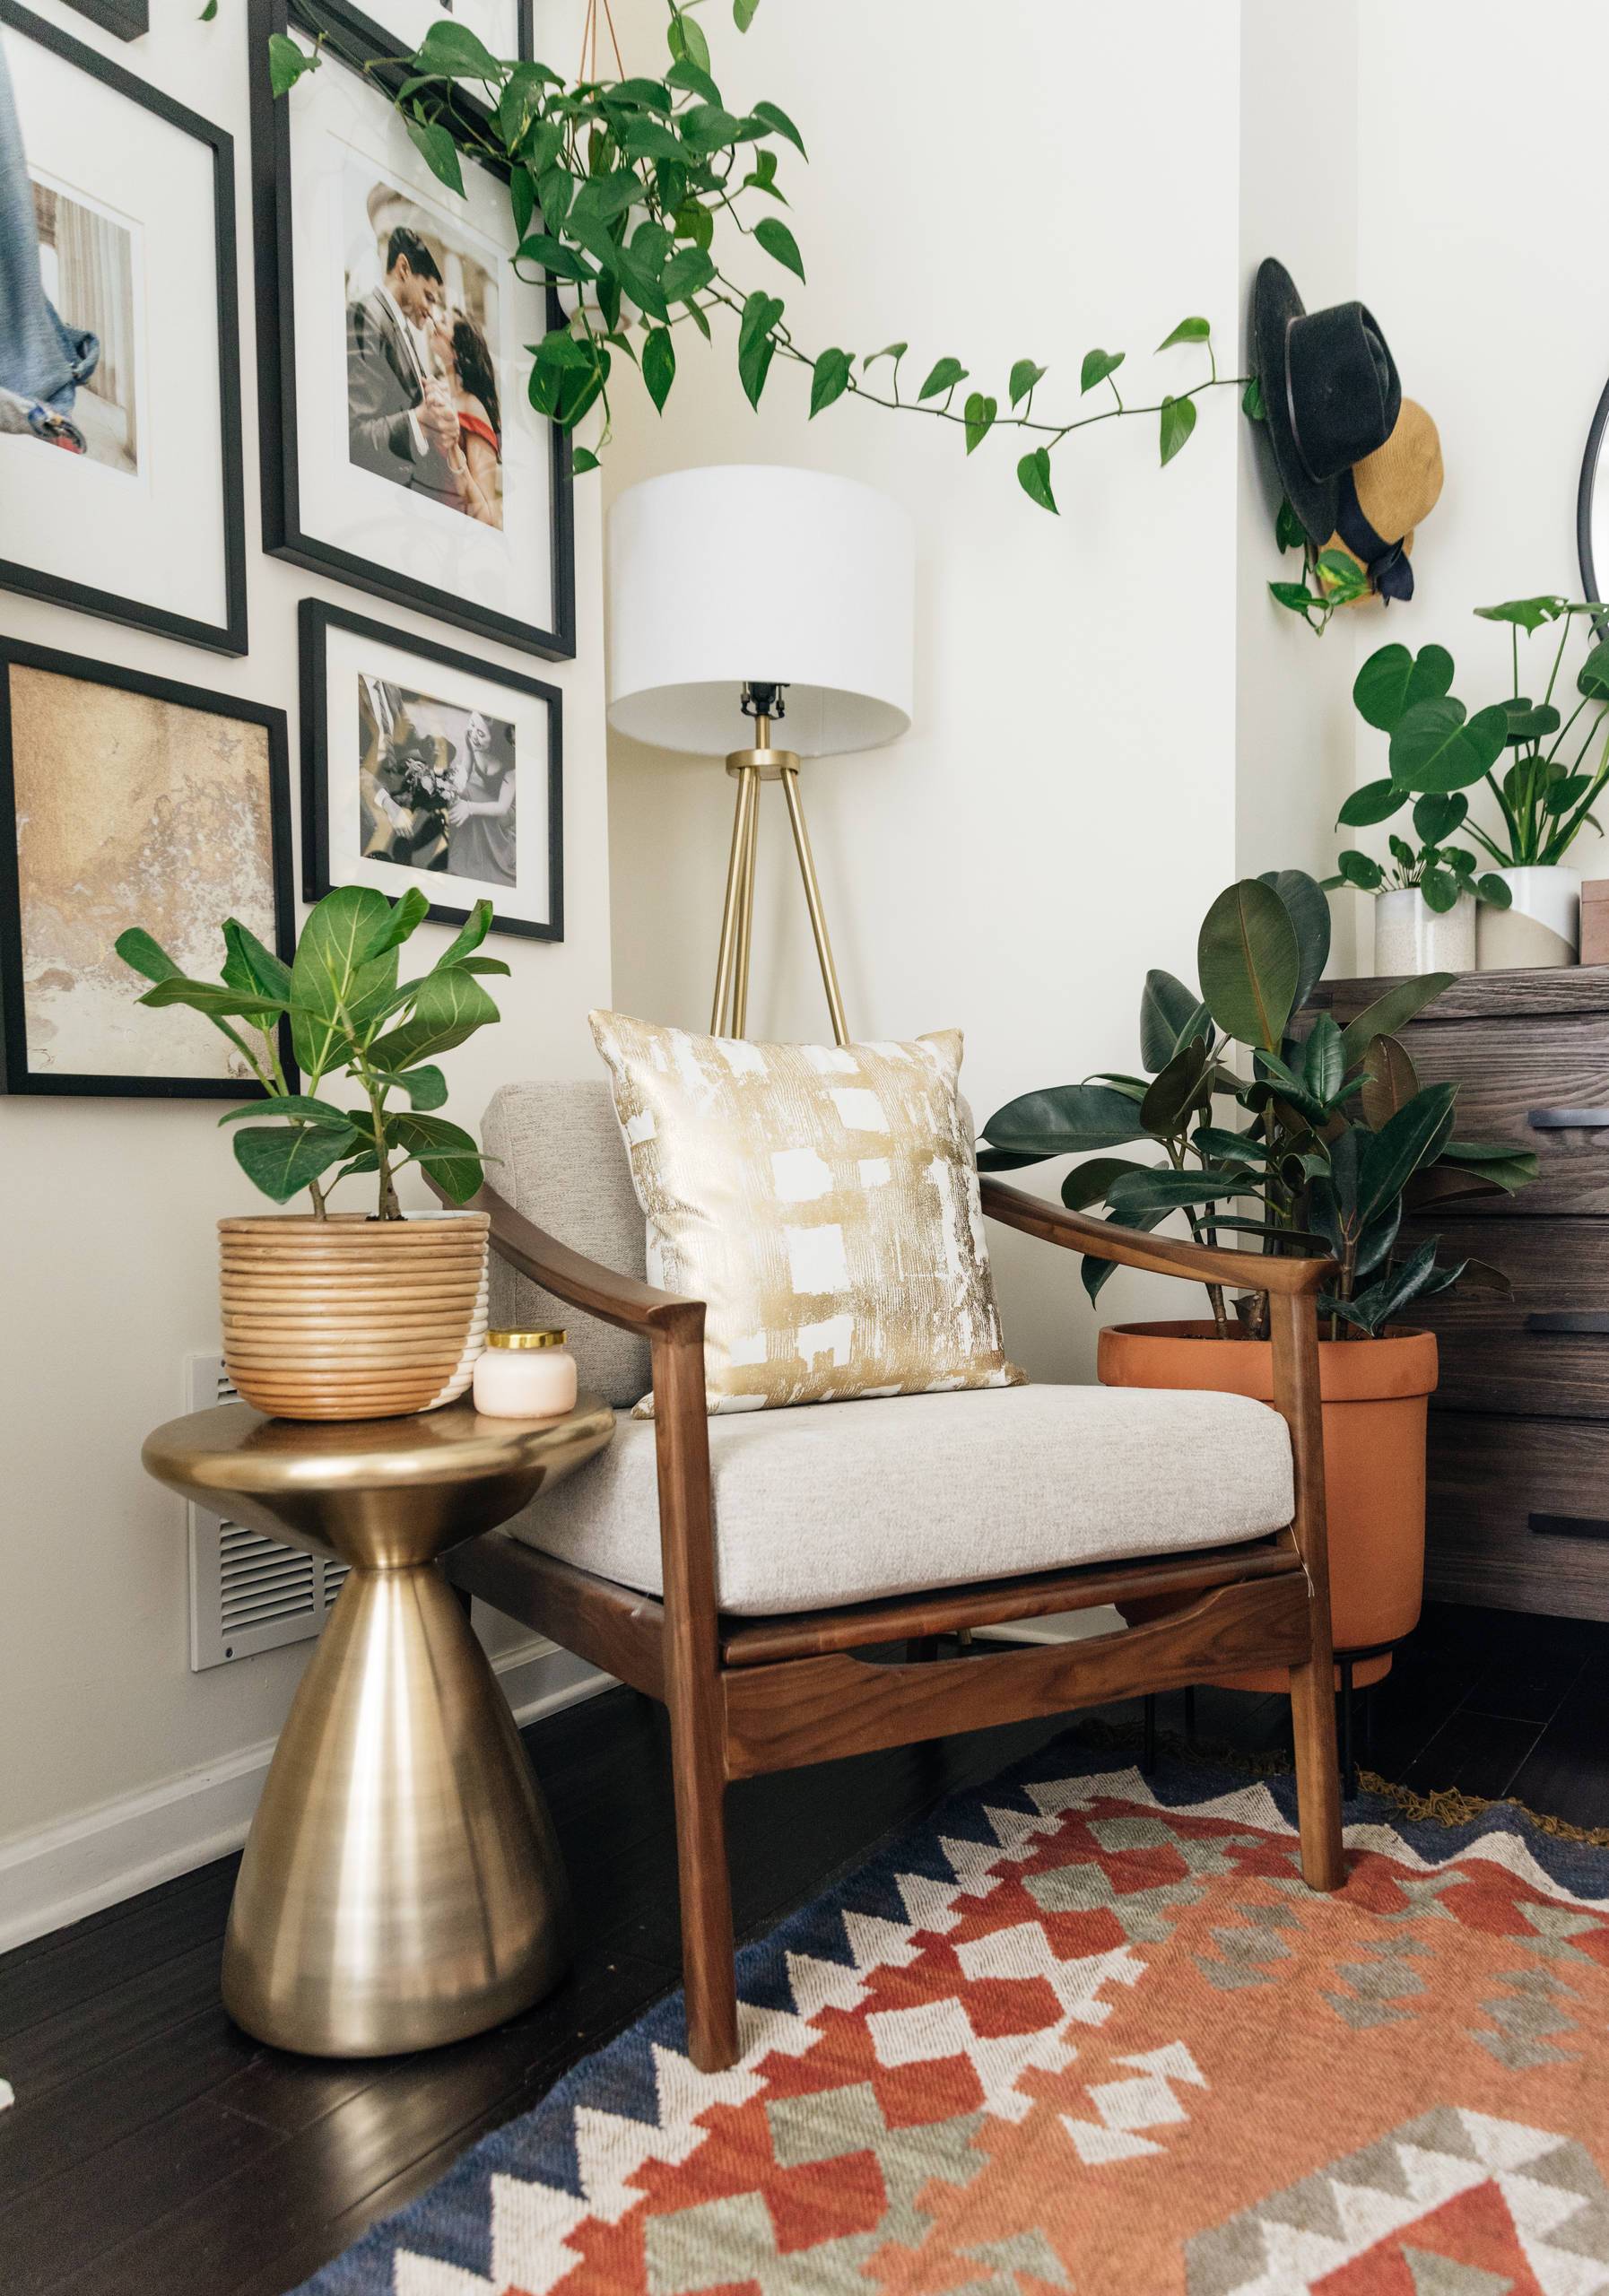 When deciding where to place your plants, you should be guided by their needs (from Houzz)